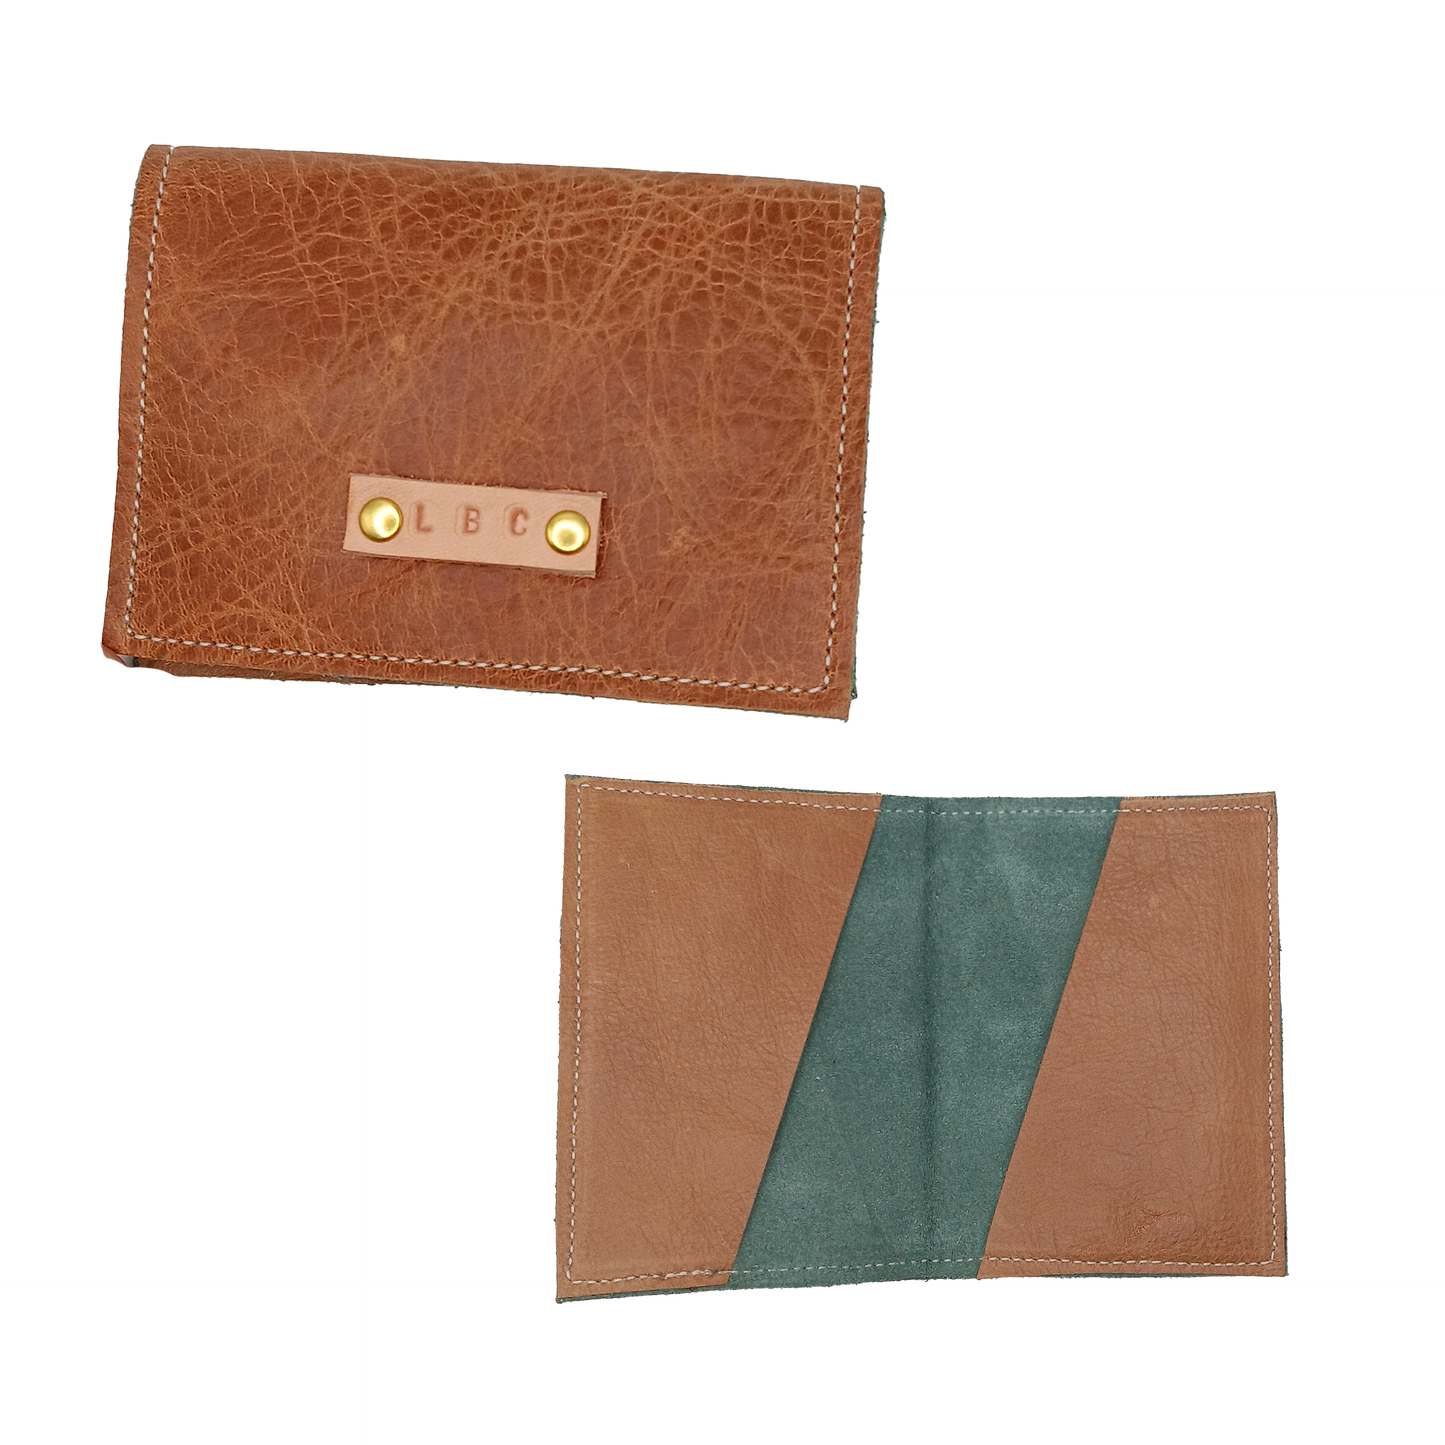 Long Beach Up-Cycled Leather Card Wallets